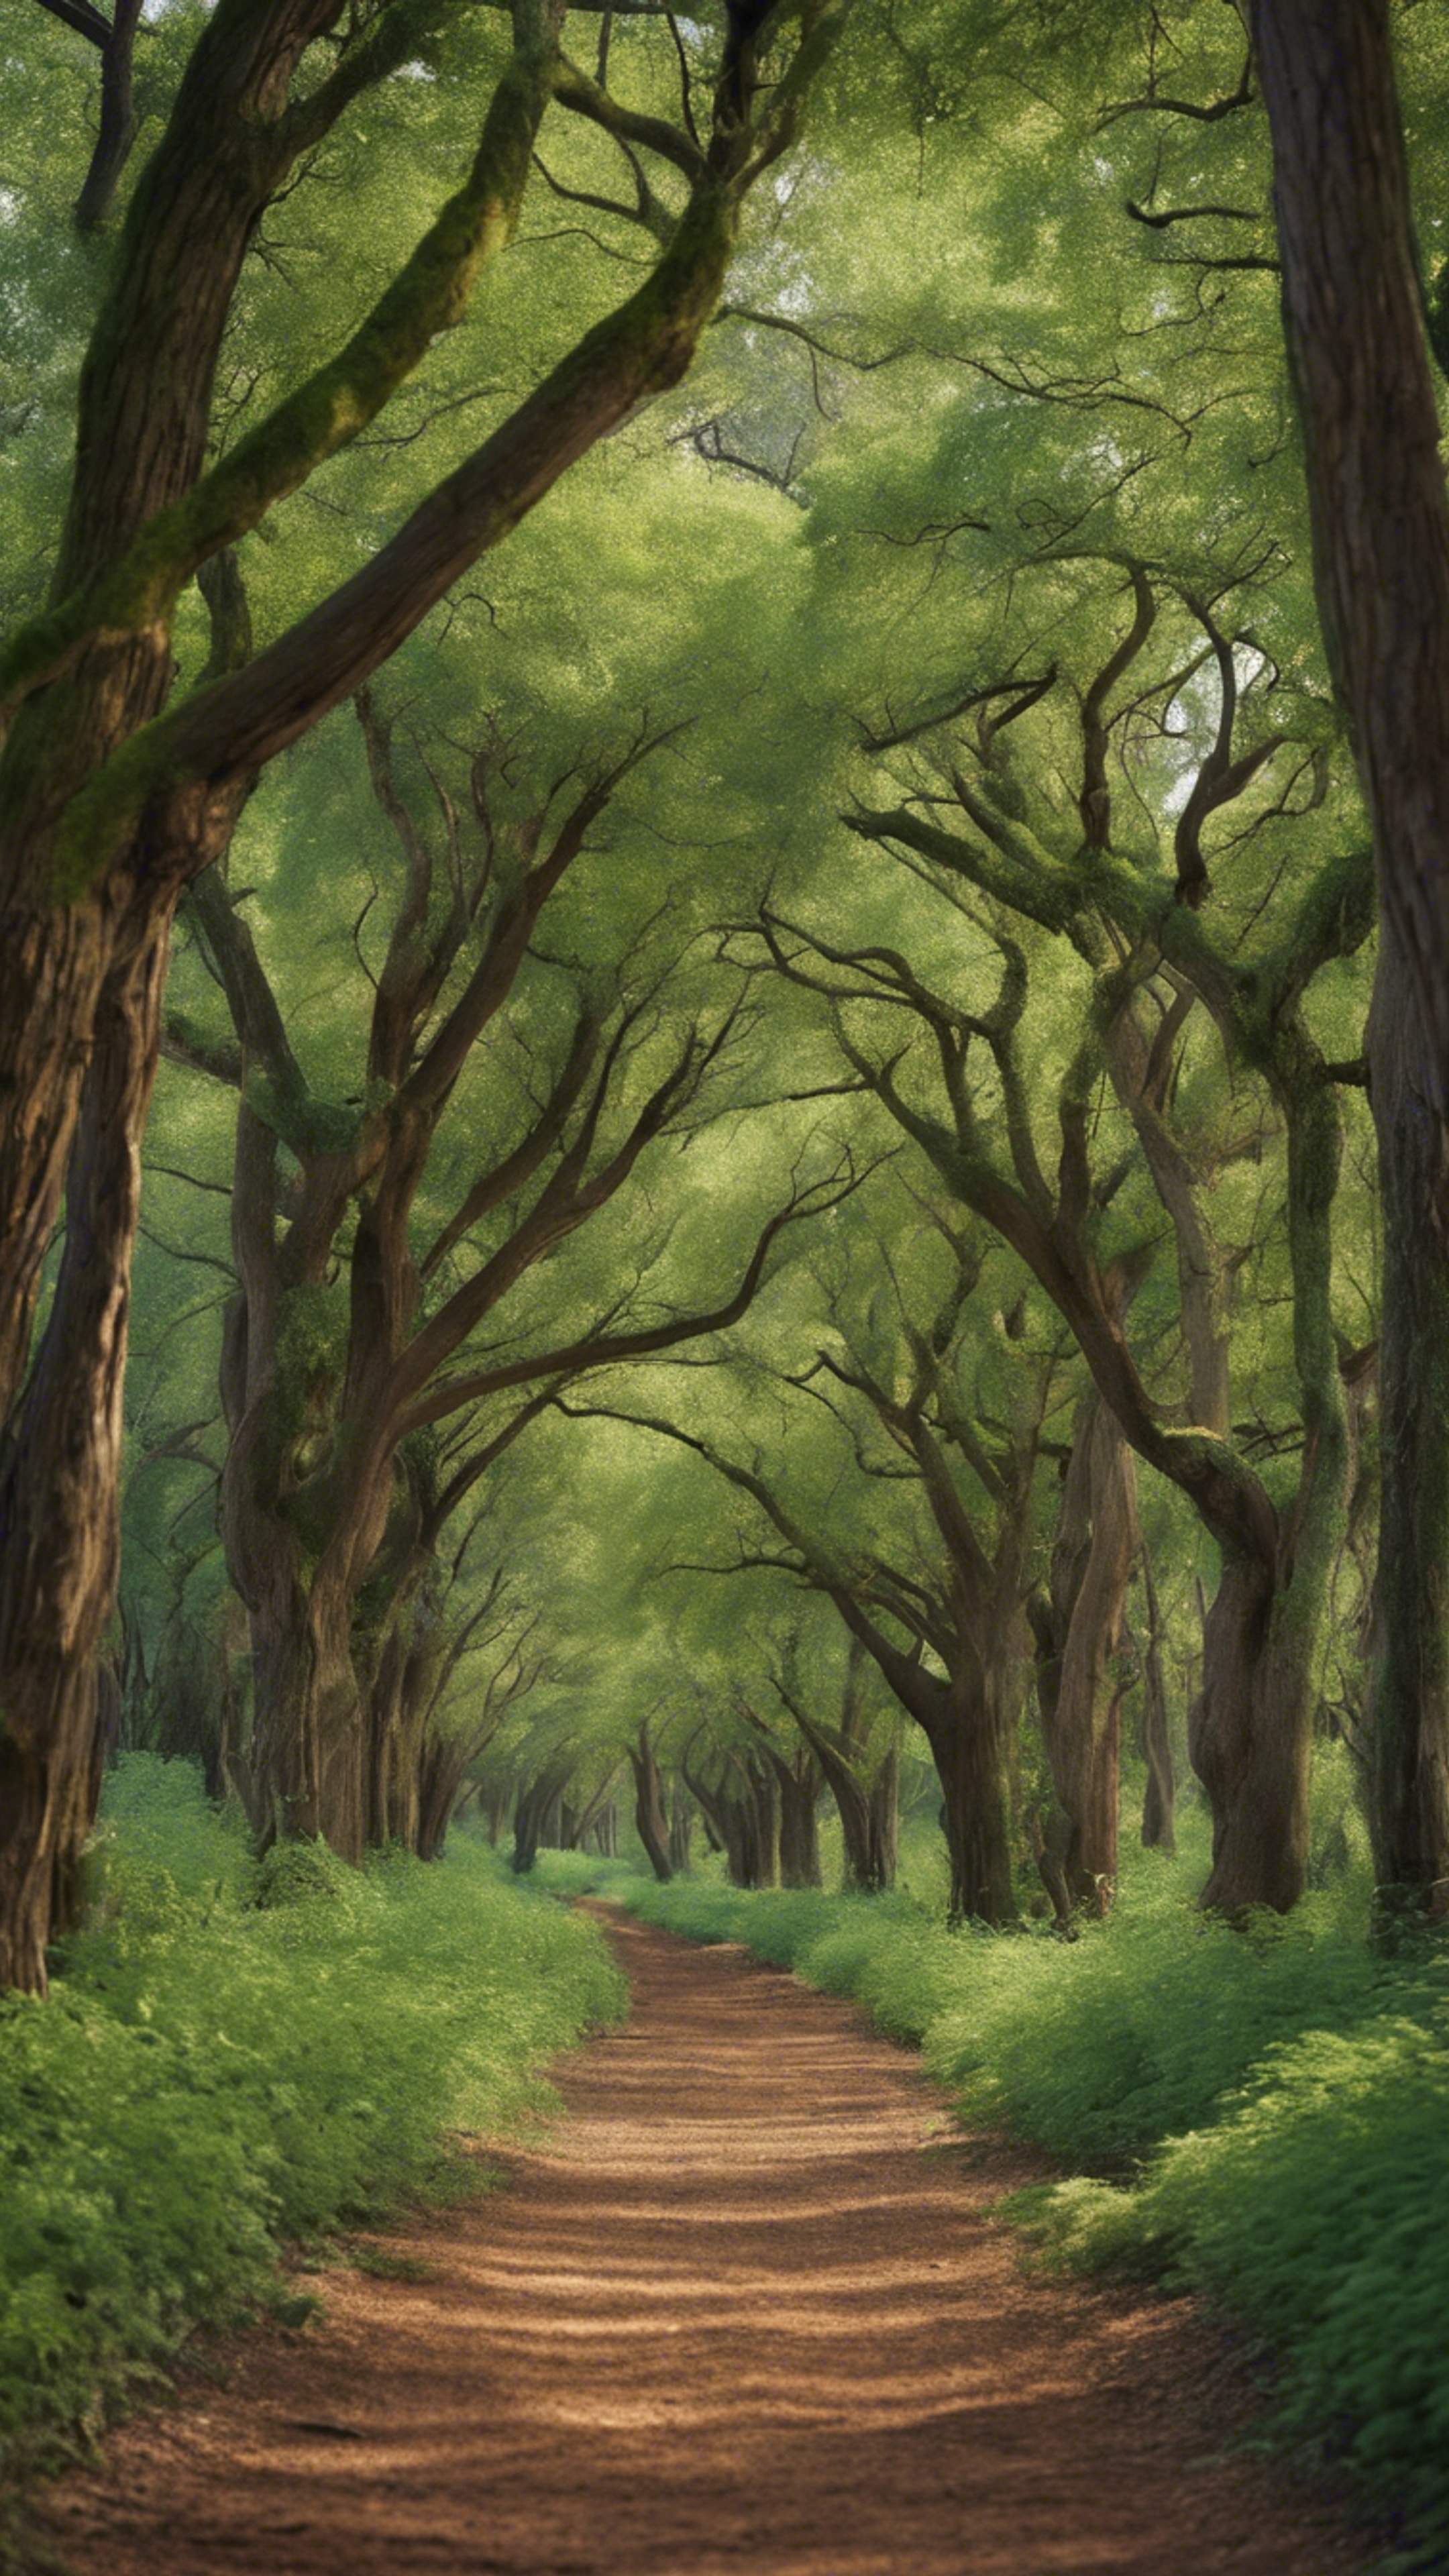 A serene forest with towering green trees and a brown dirt path winding through it.壁紙[79320a10c72641498306]